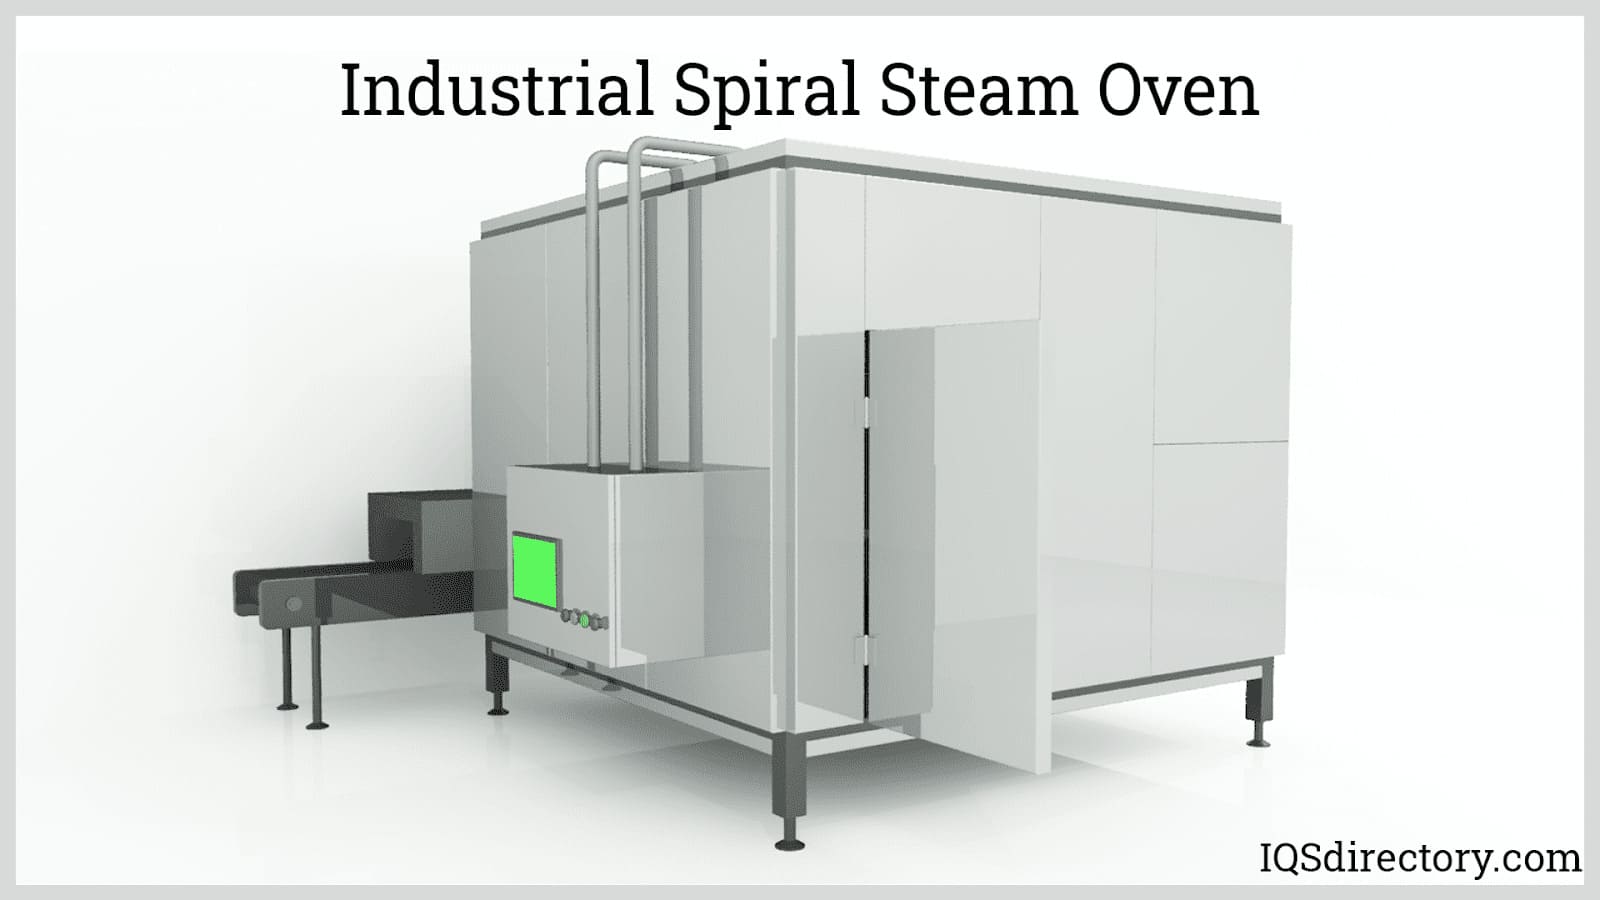 Standard Industrial Electric Convection Batch Oven